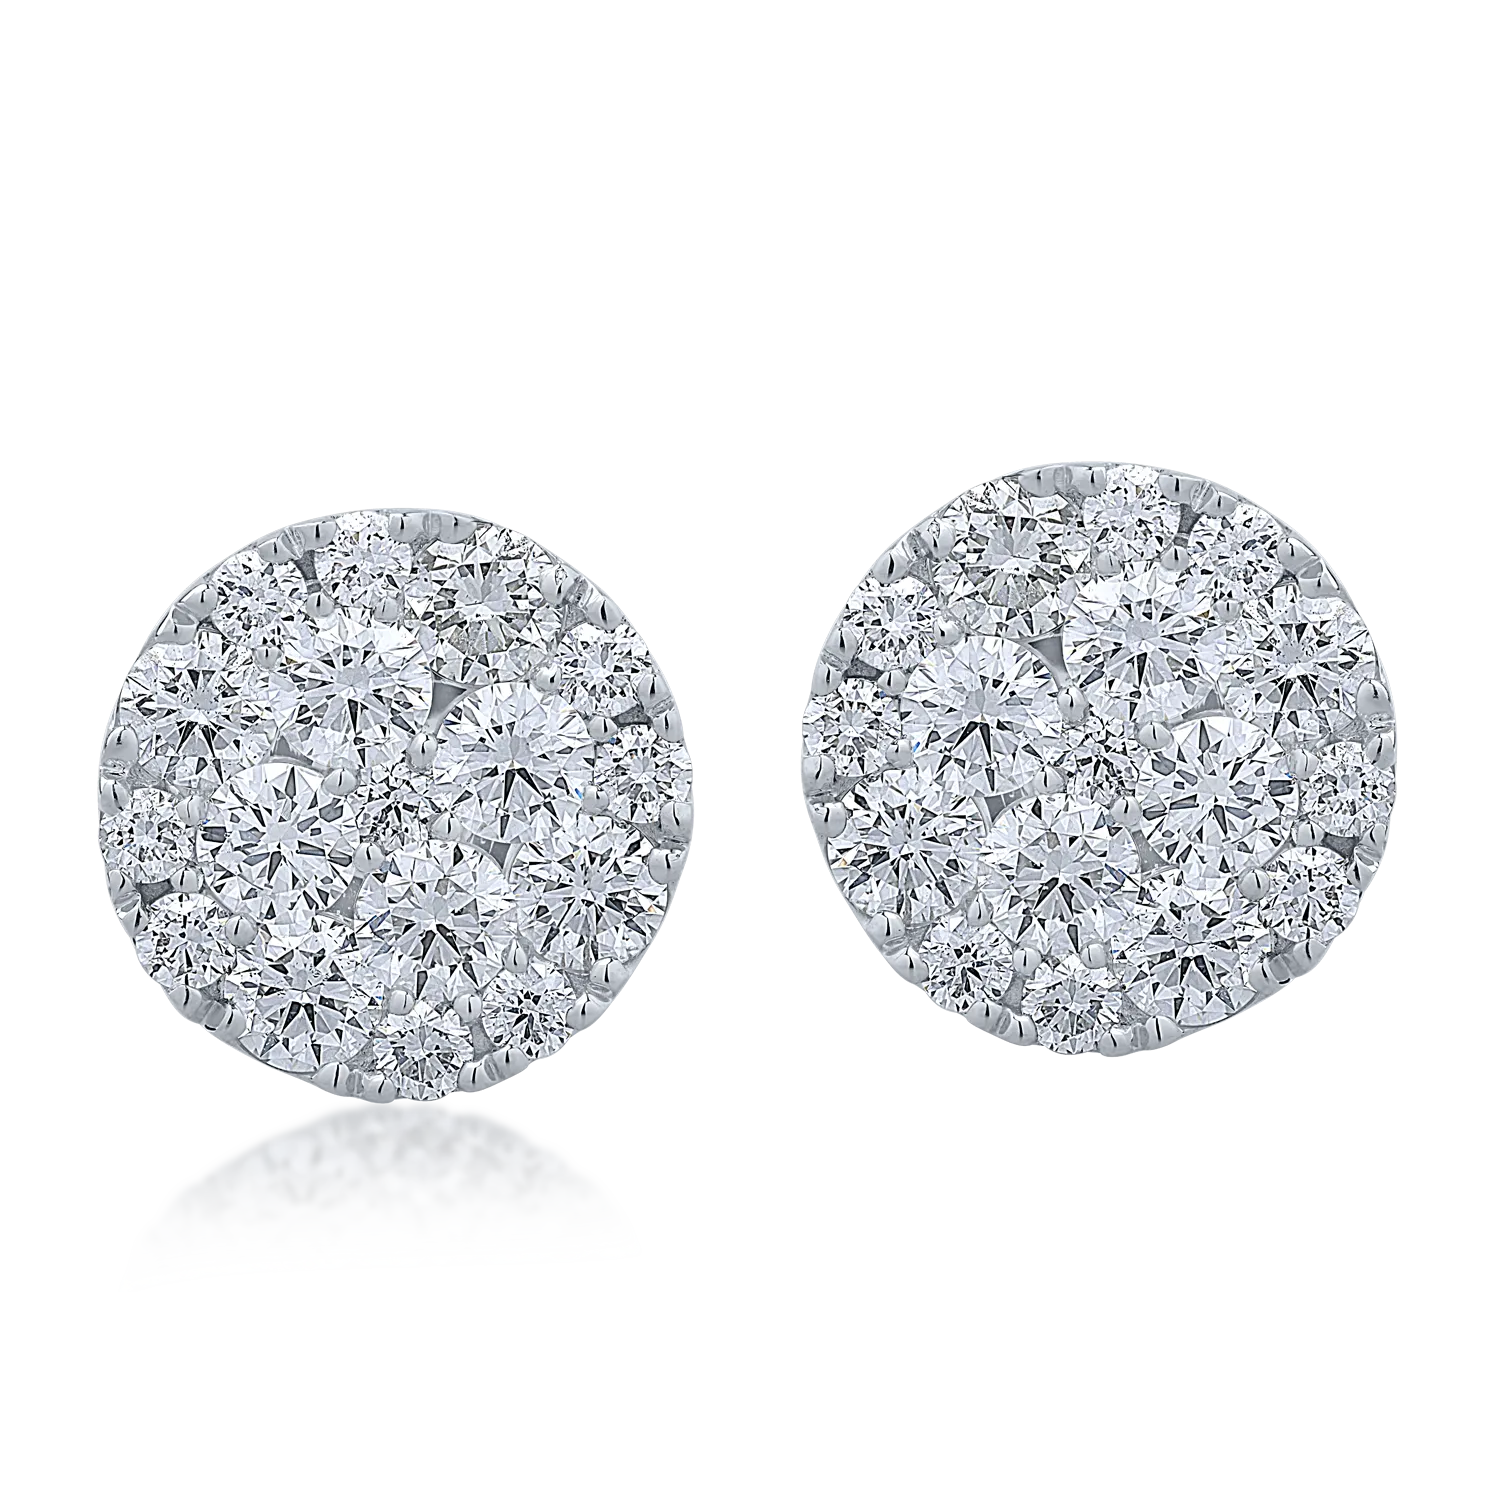 White gold earrings with 1.46ct diamonds